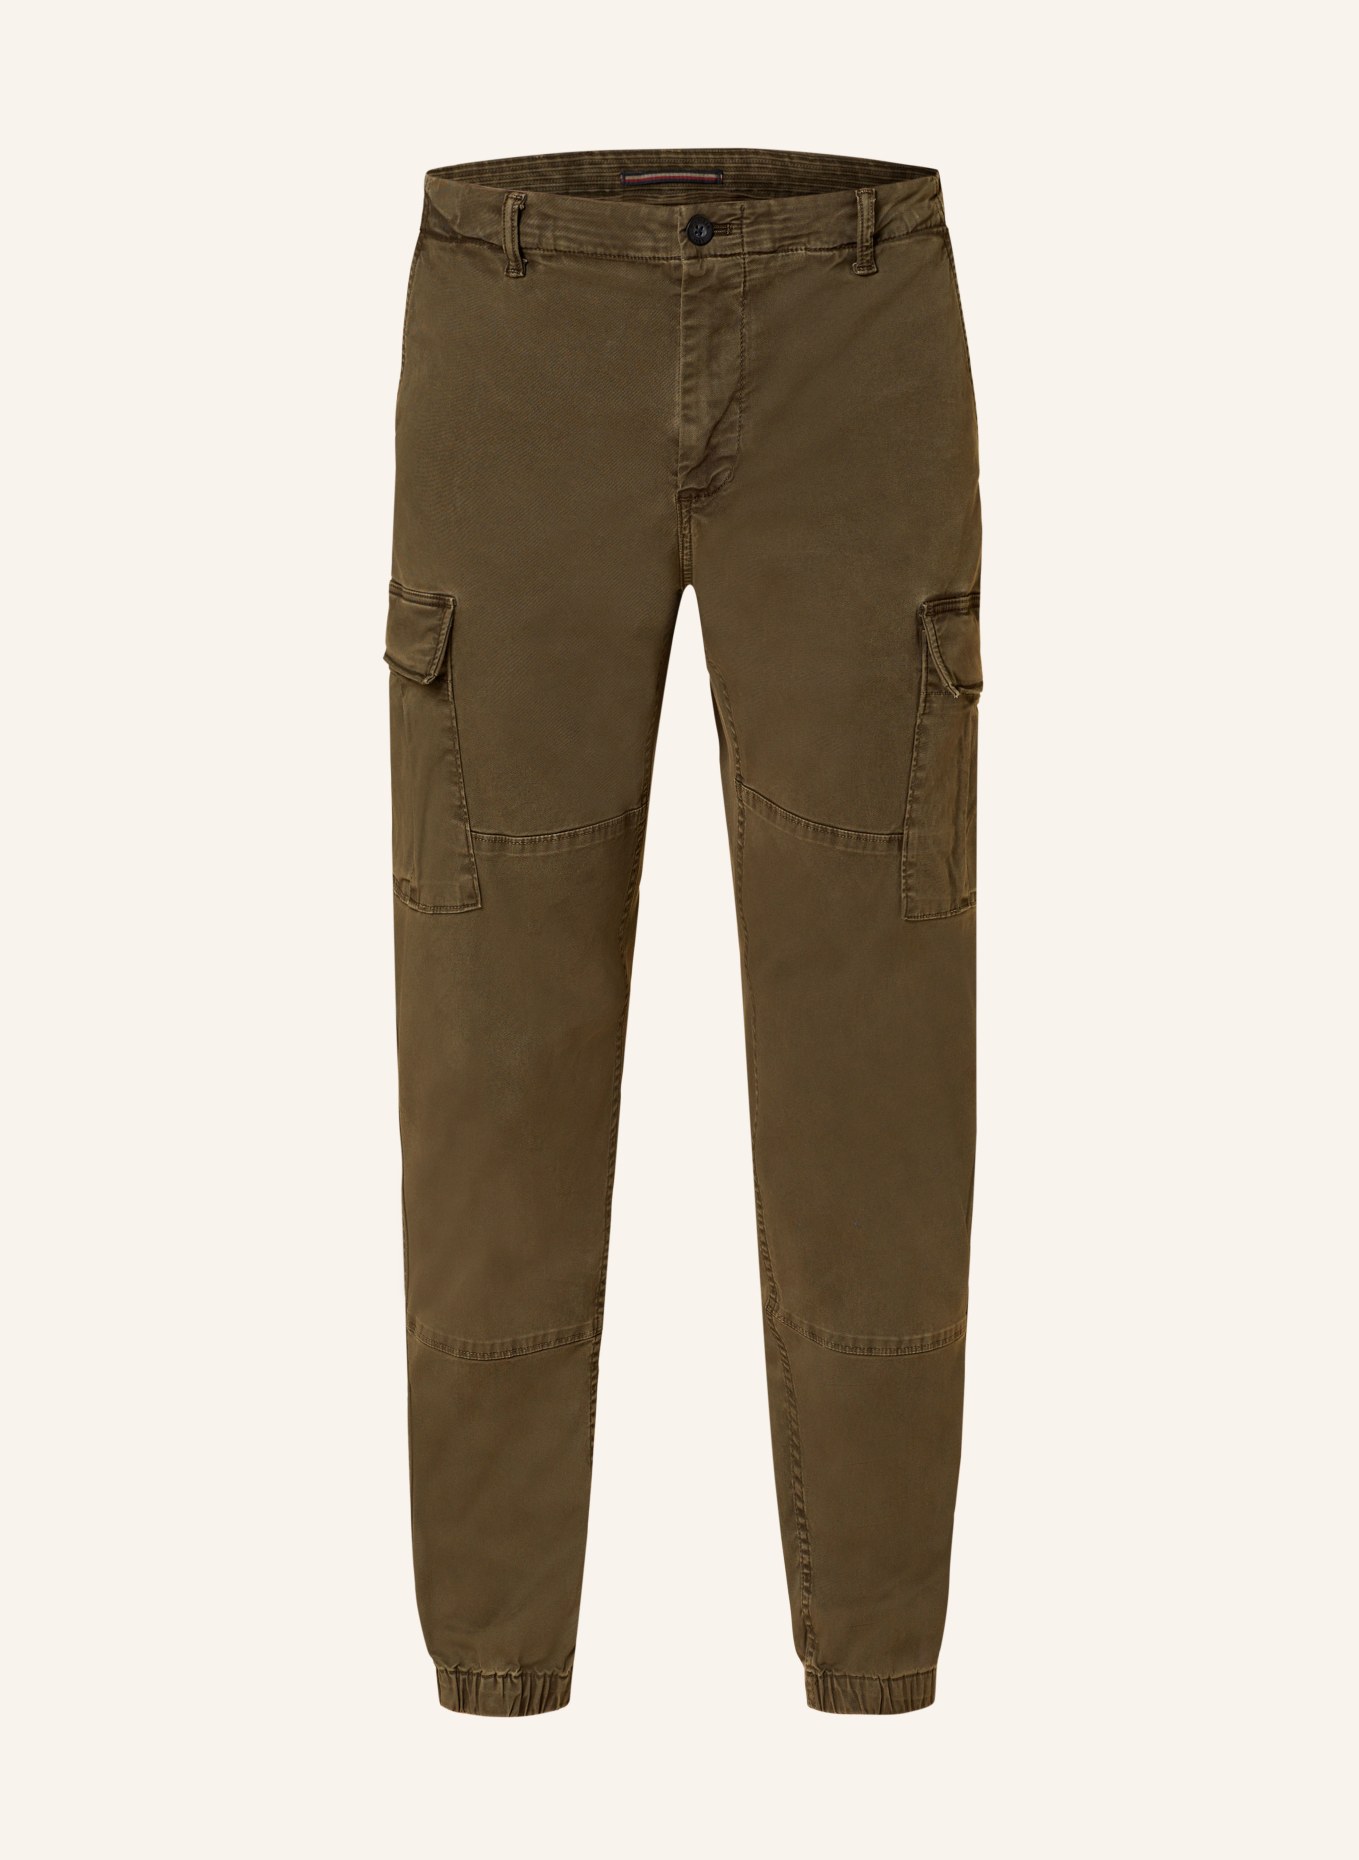 TOMMY HILFIGER Cargohose Relaxed Tapered Fit, Farbe: OLIV (Bild 1)